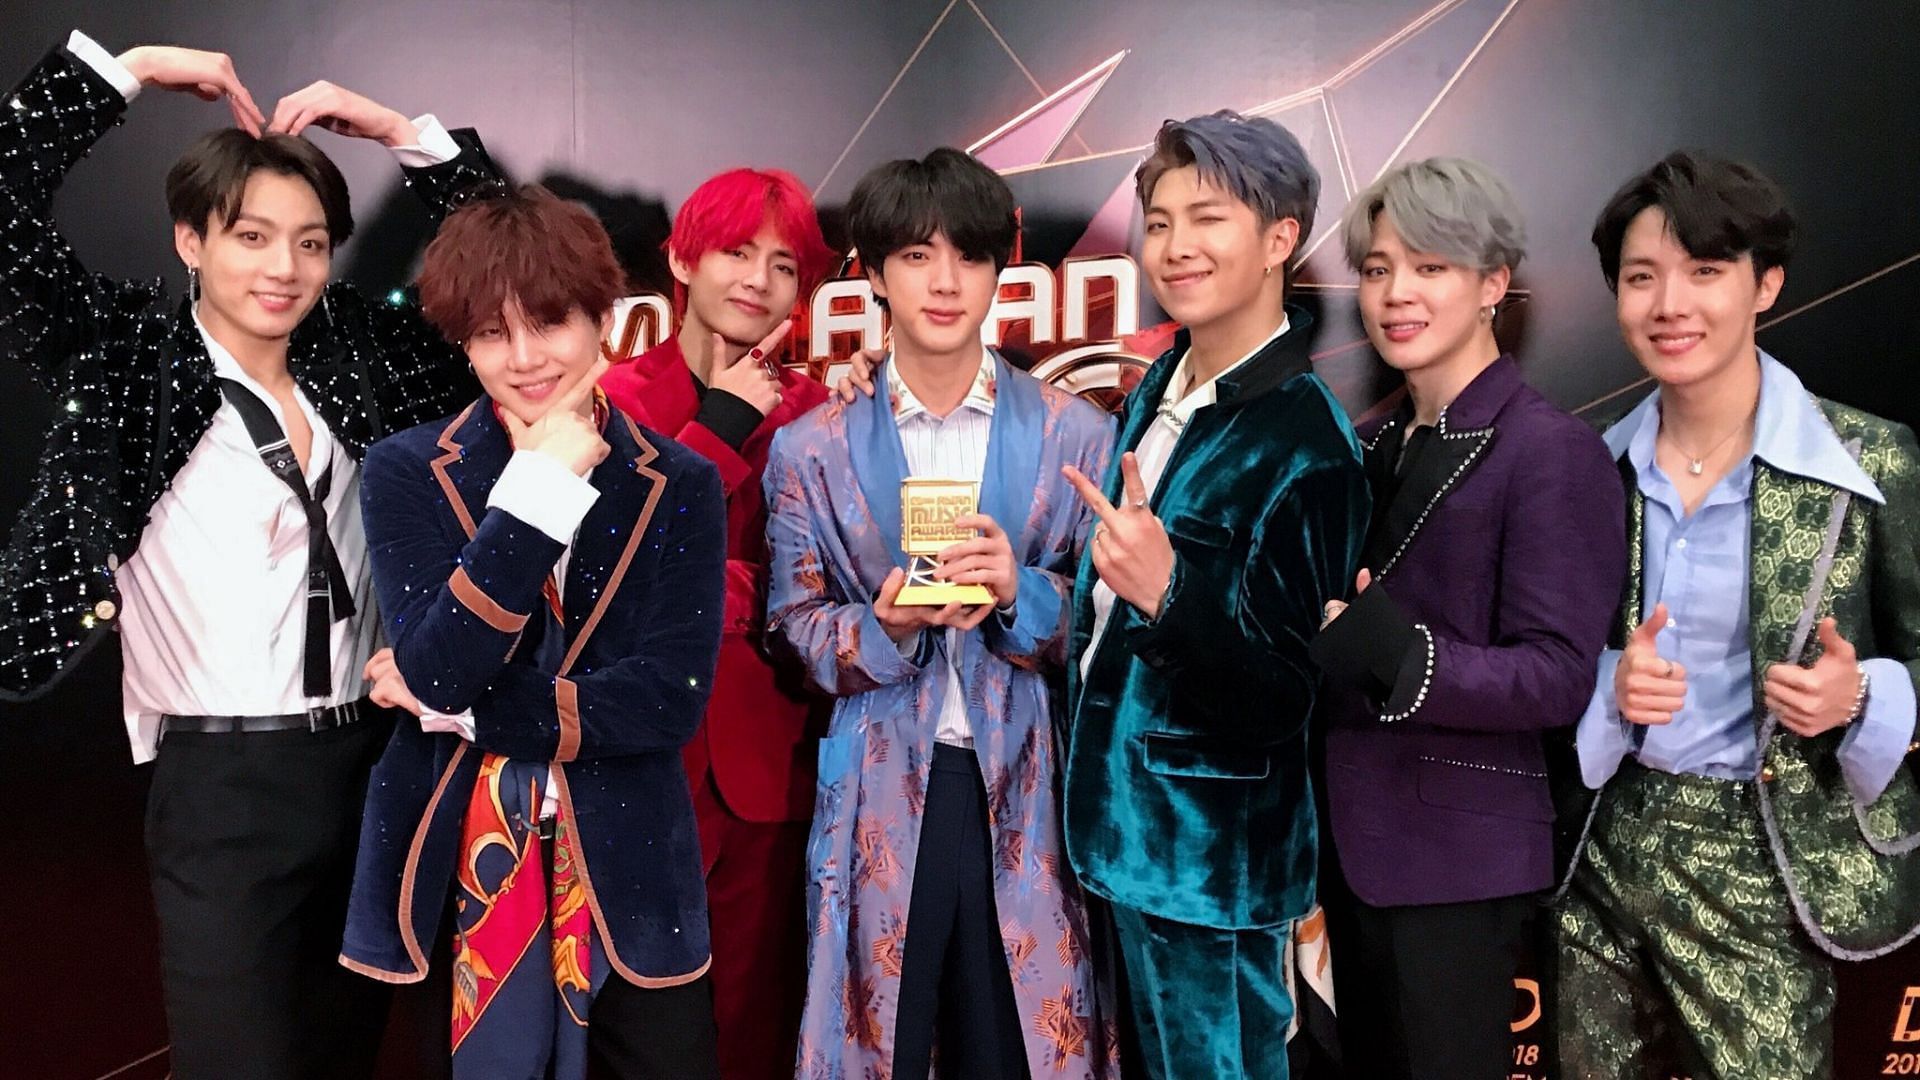 BTS at the 2018 MAMA Awards (Image via Twitter/bts_official)